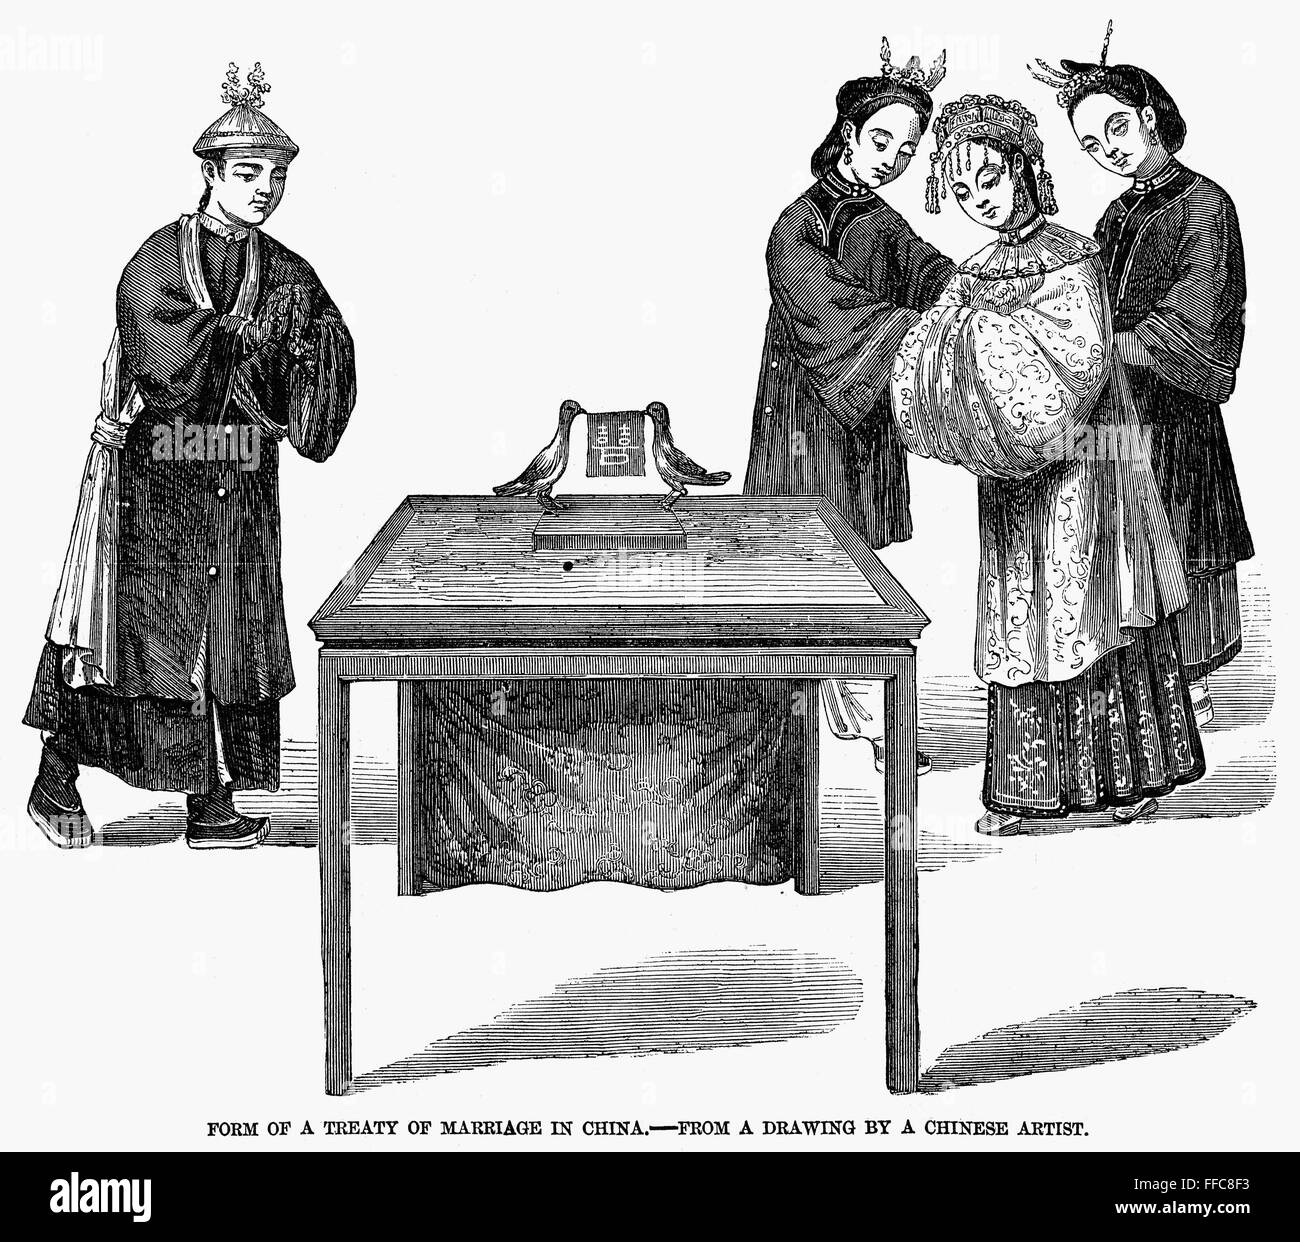 CHINA: MARRIAGE, 1857. /nForm of a treaty of marriage in China. Wood engraving, 1857. Stock Photo